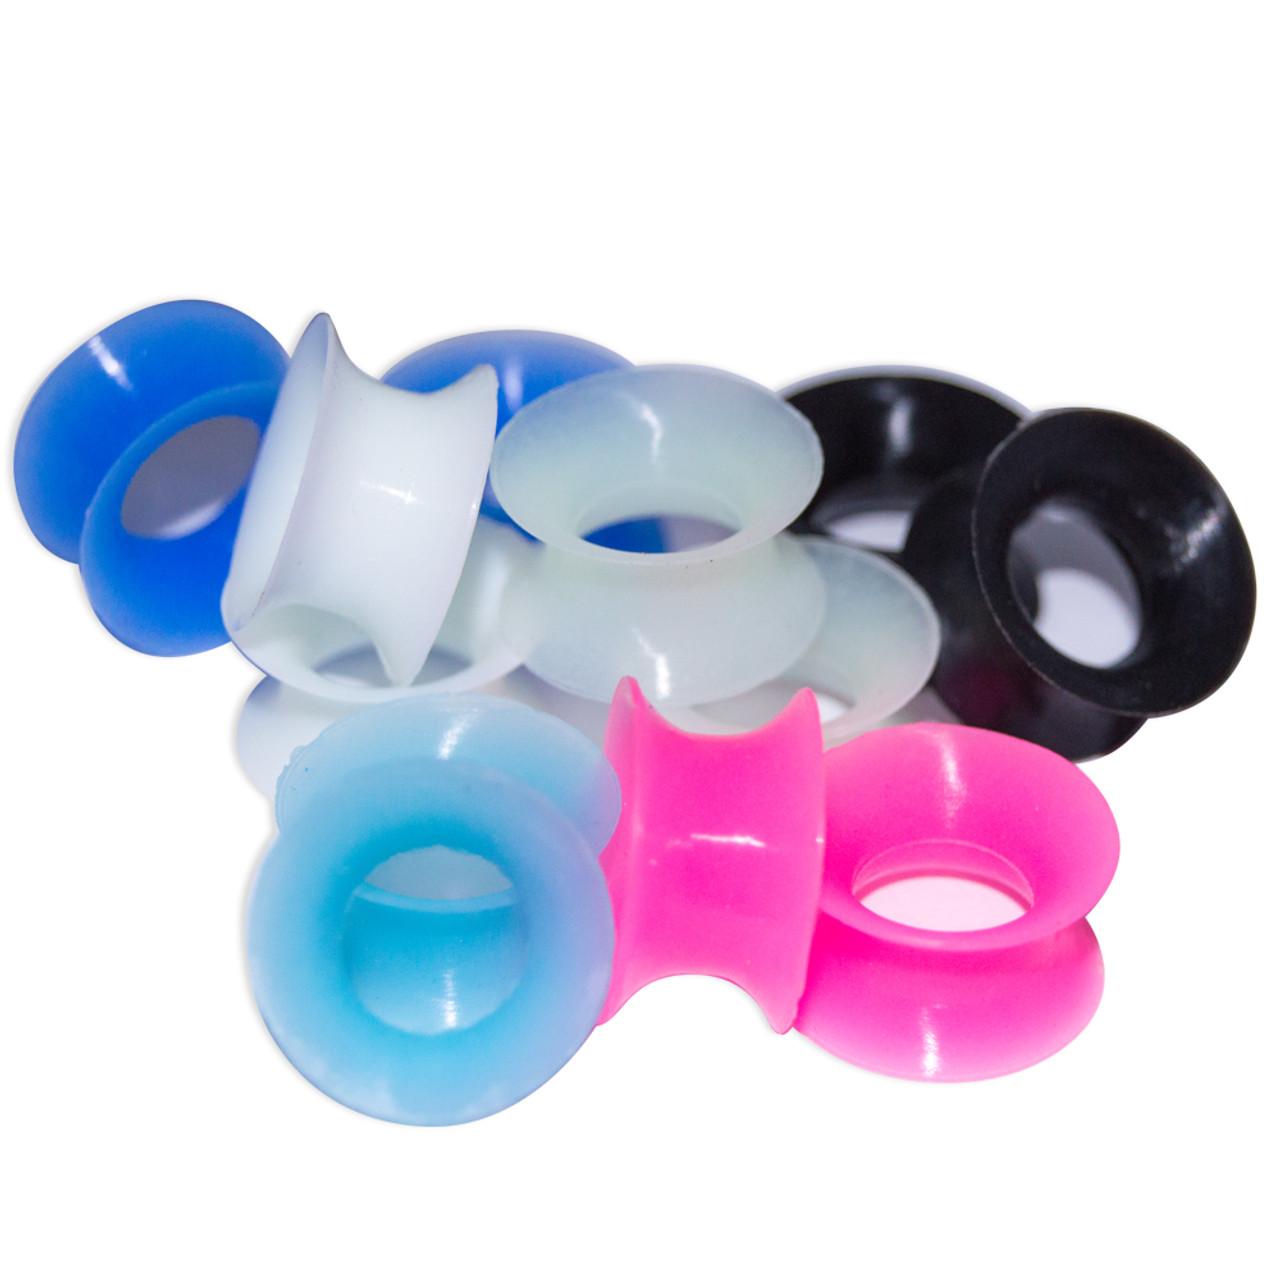 https://cdn11.bigcommerce.com/s-yfjn5bpc6d/images/stencil/1280x1280/products/532/1642/uv-glow-super-thin-silicone-ear-tunnels-pack-6-colors-included-5-sizes-available-31__64339.1611098508.jpg?c=1